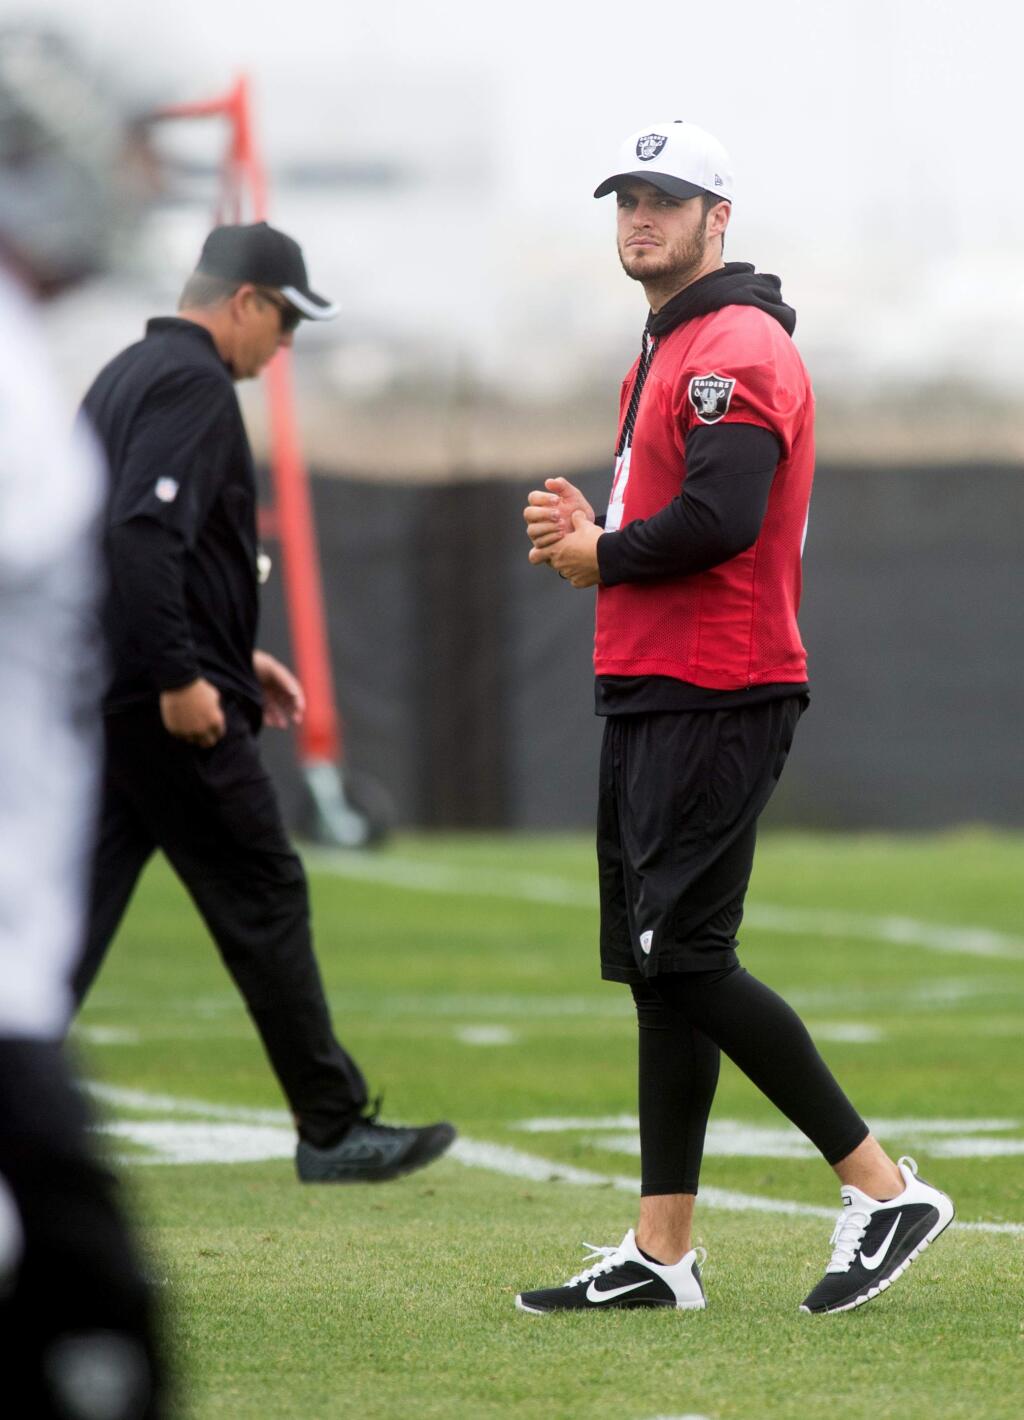 Derek Carr watches an Oakland Raiders workout on Tuesday, May 19, 2015, in Alameda, Calif. (AP Photo/Noah Berger)